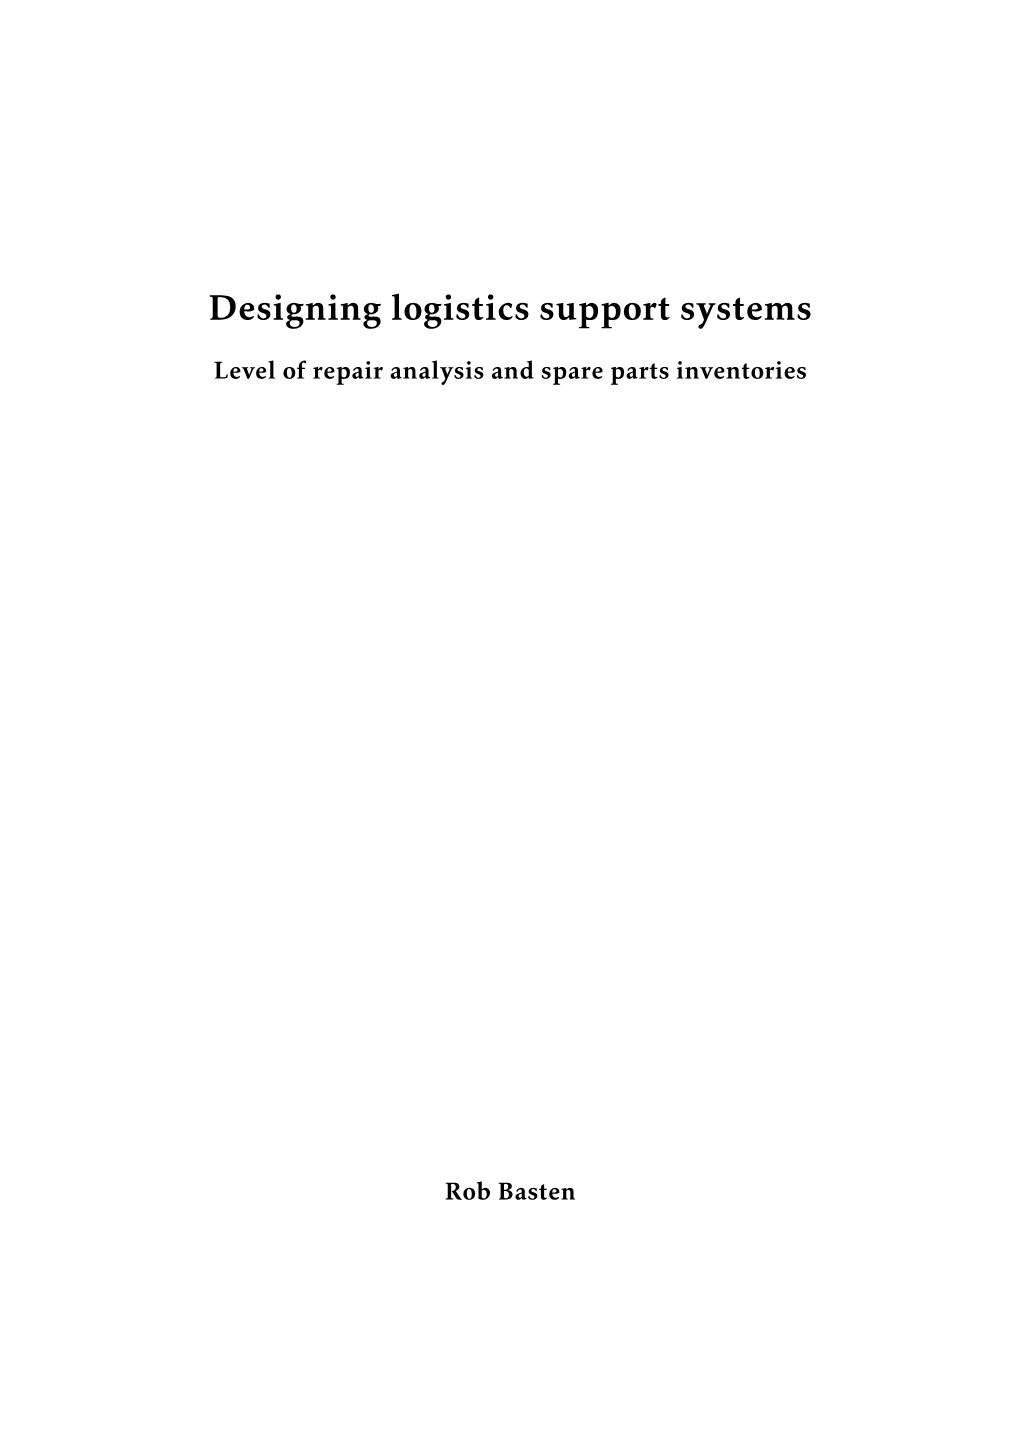 Designing Logistics Support Systems. Level of Repair Analysis and Spare